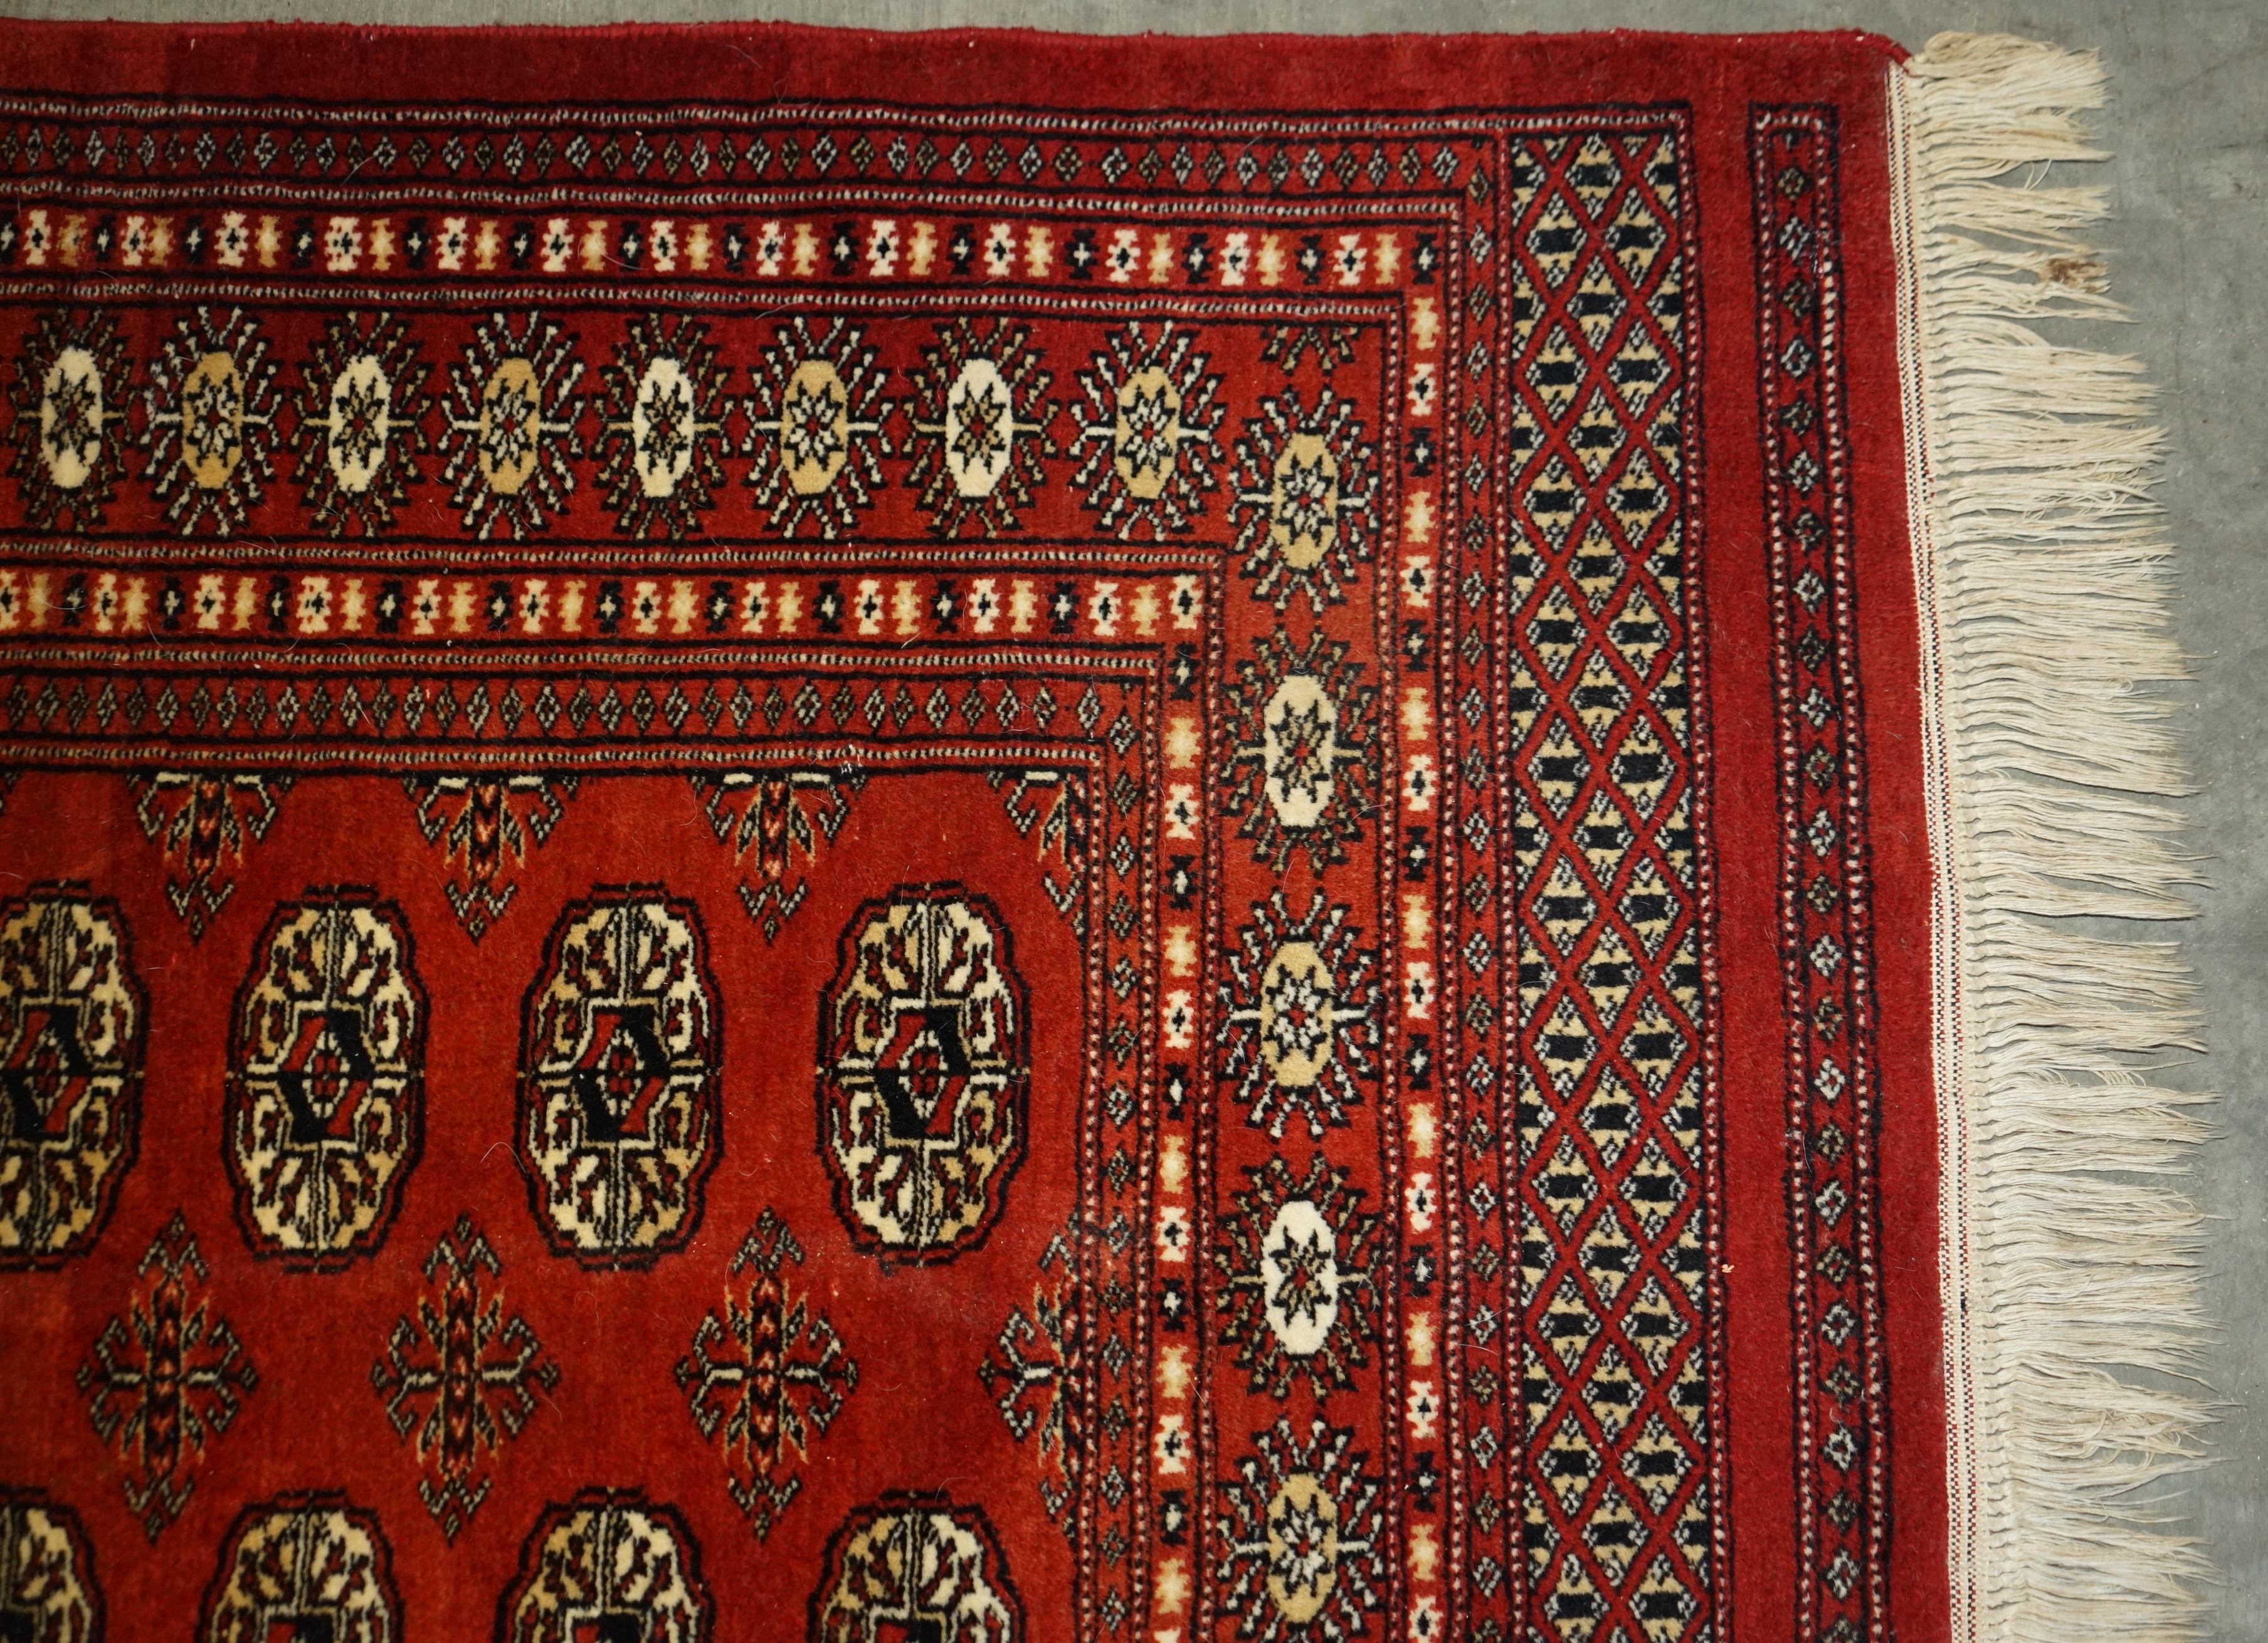 Decorative Floral Rug Medium Sized 96.5cm x 188cm Fine Hand Knotted For Sale 4